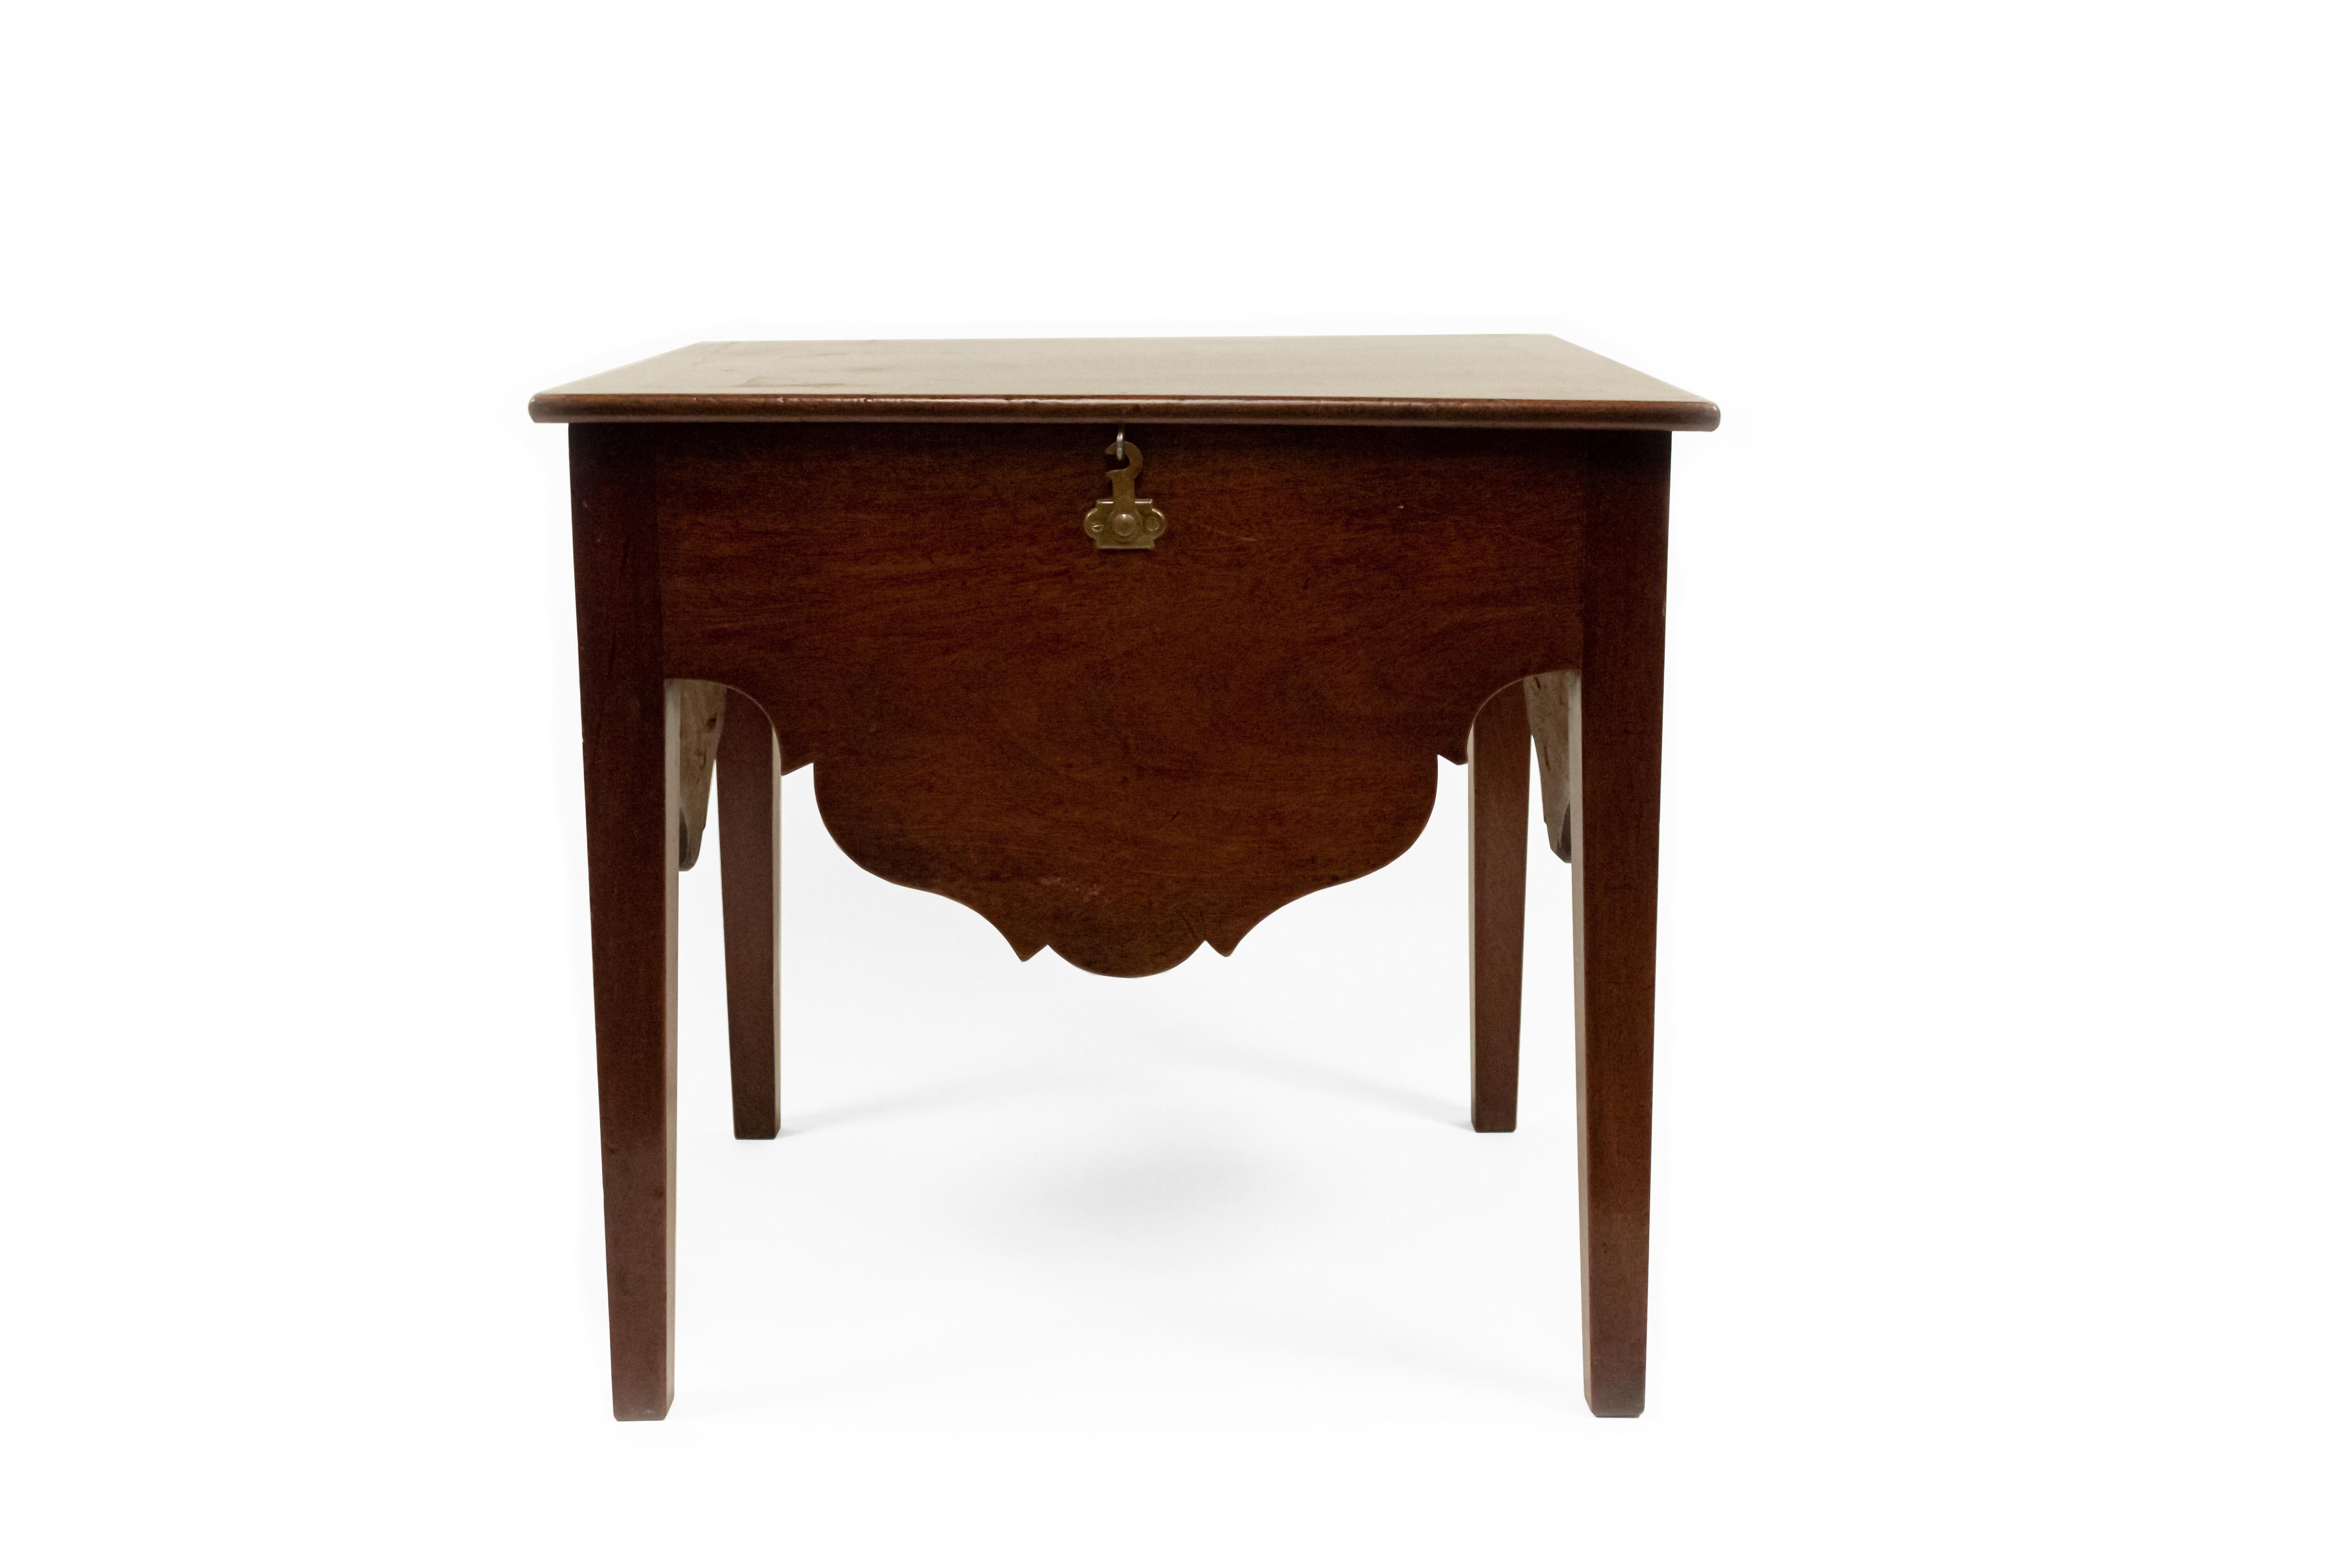 English Georgian (circa 1770) mahogany low end table / box commode with lift top and a shaped lower apron resting on square tapered legs.